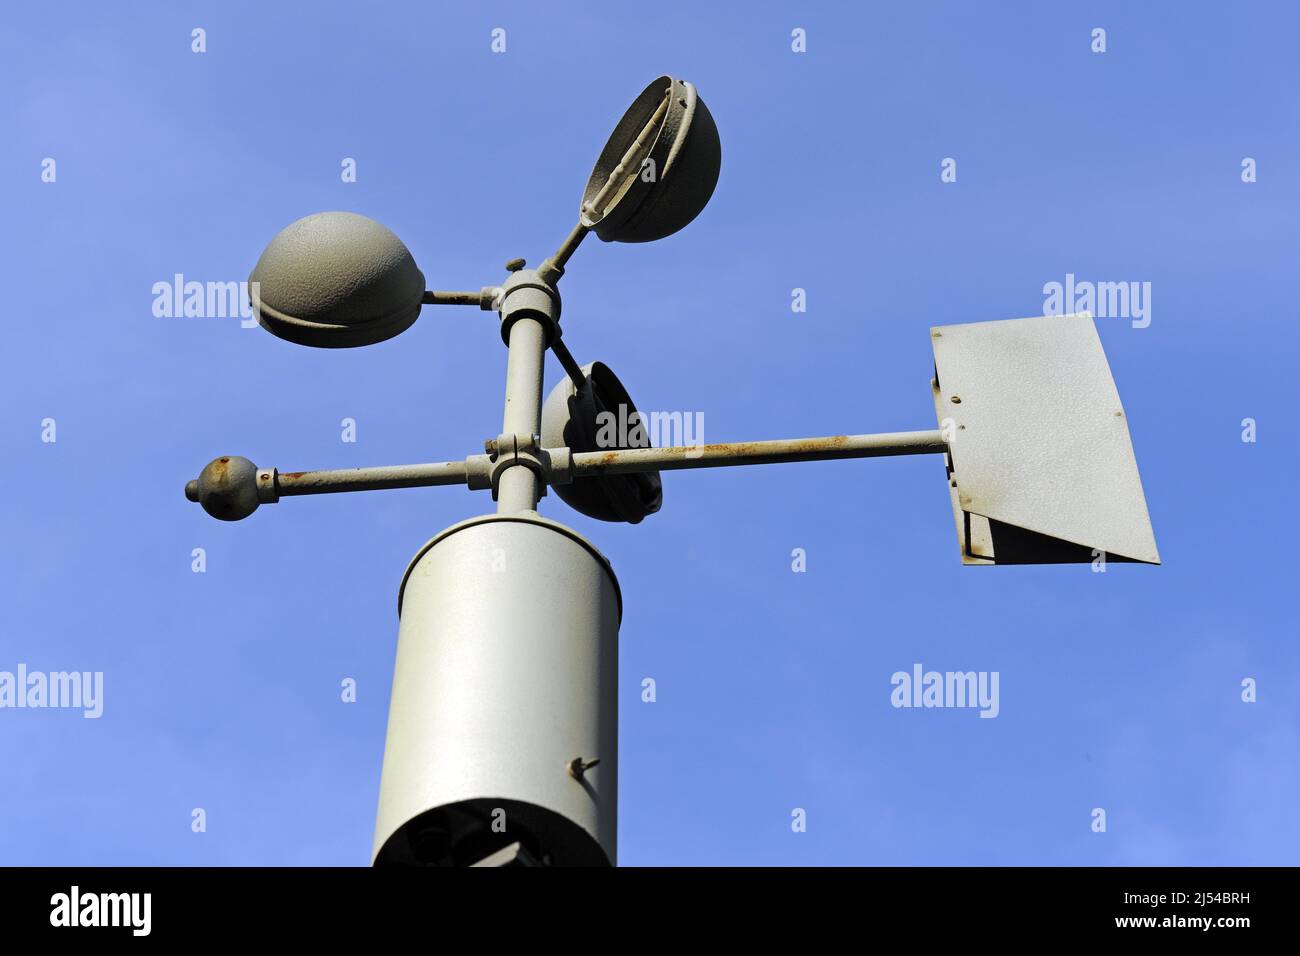 cup anemometer with wind vane for measuring wind speed and wind direction, Austria, Tyrol Stock Photo